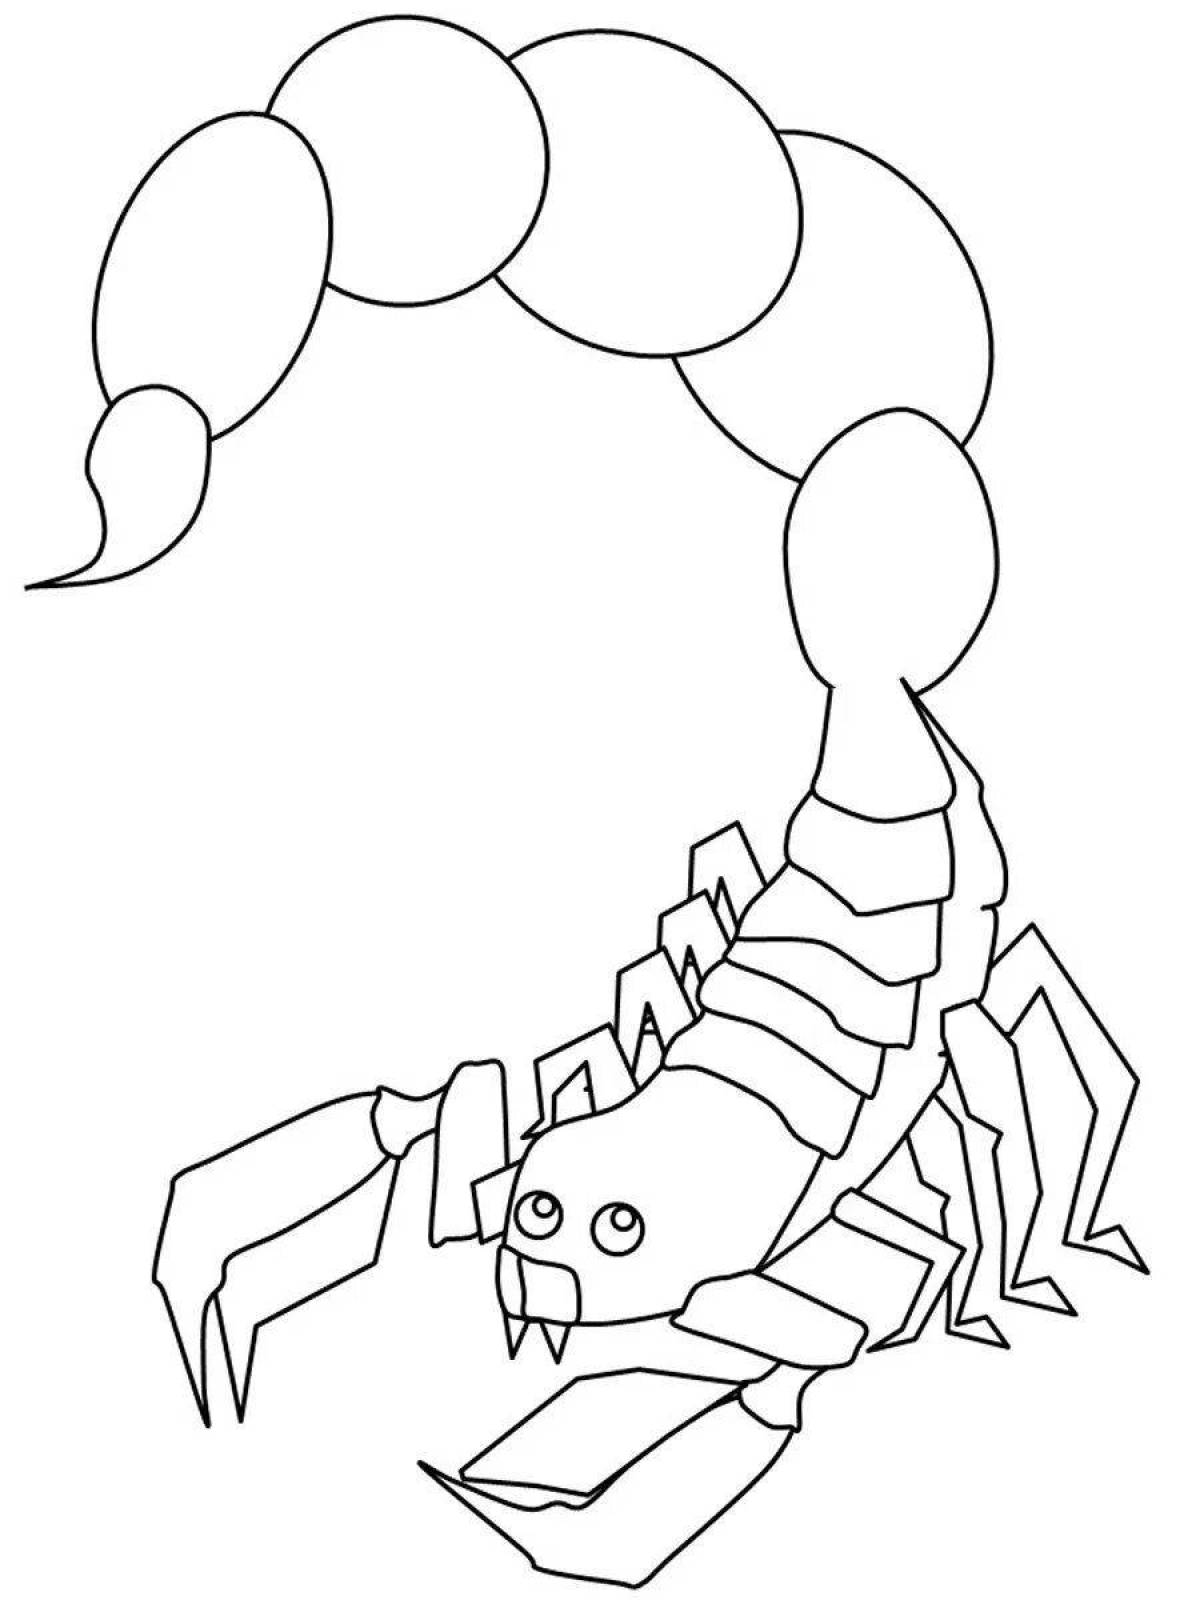 Coloring book playful scorpion for children